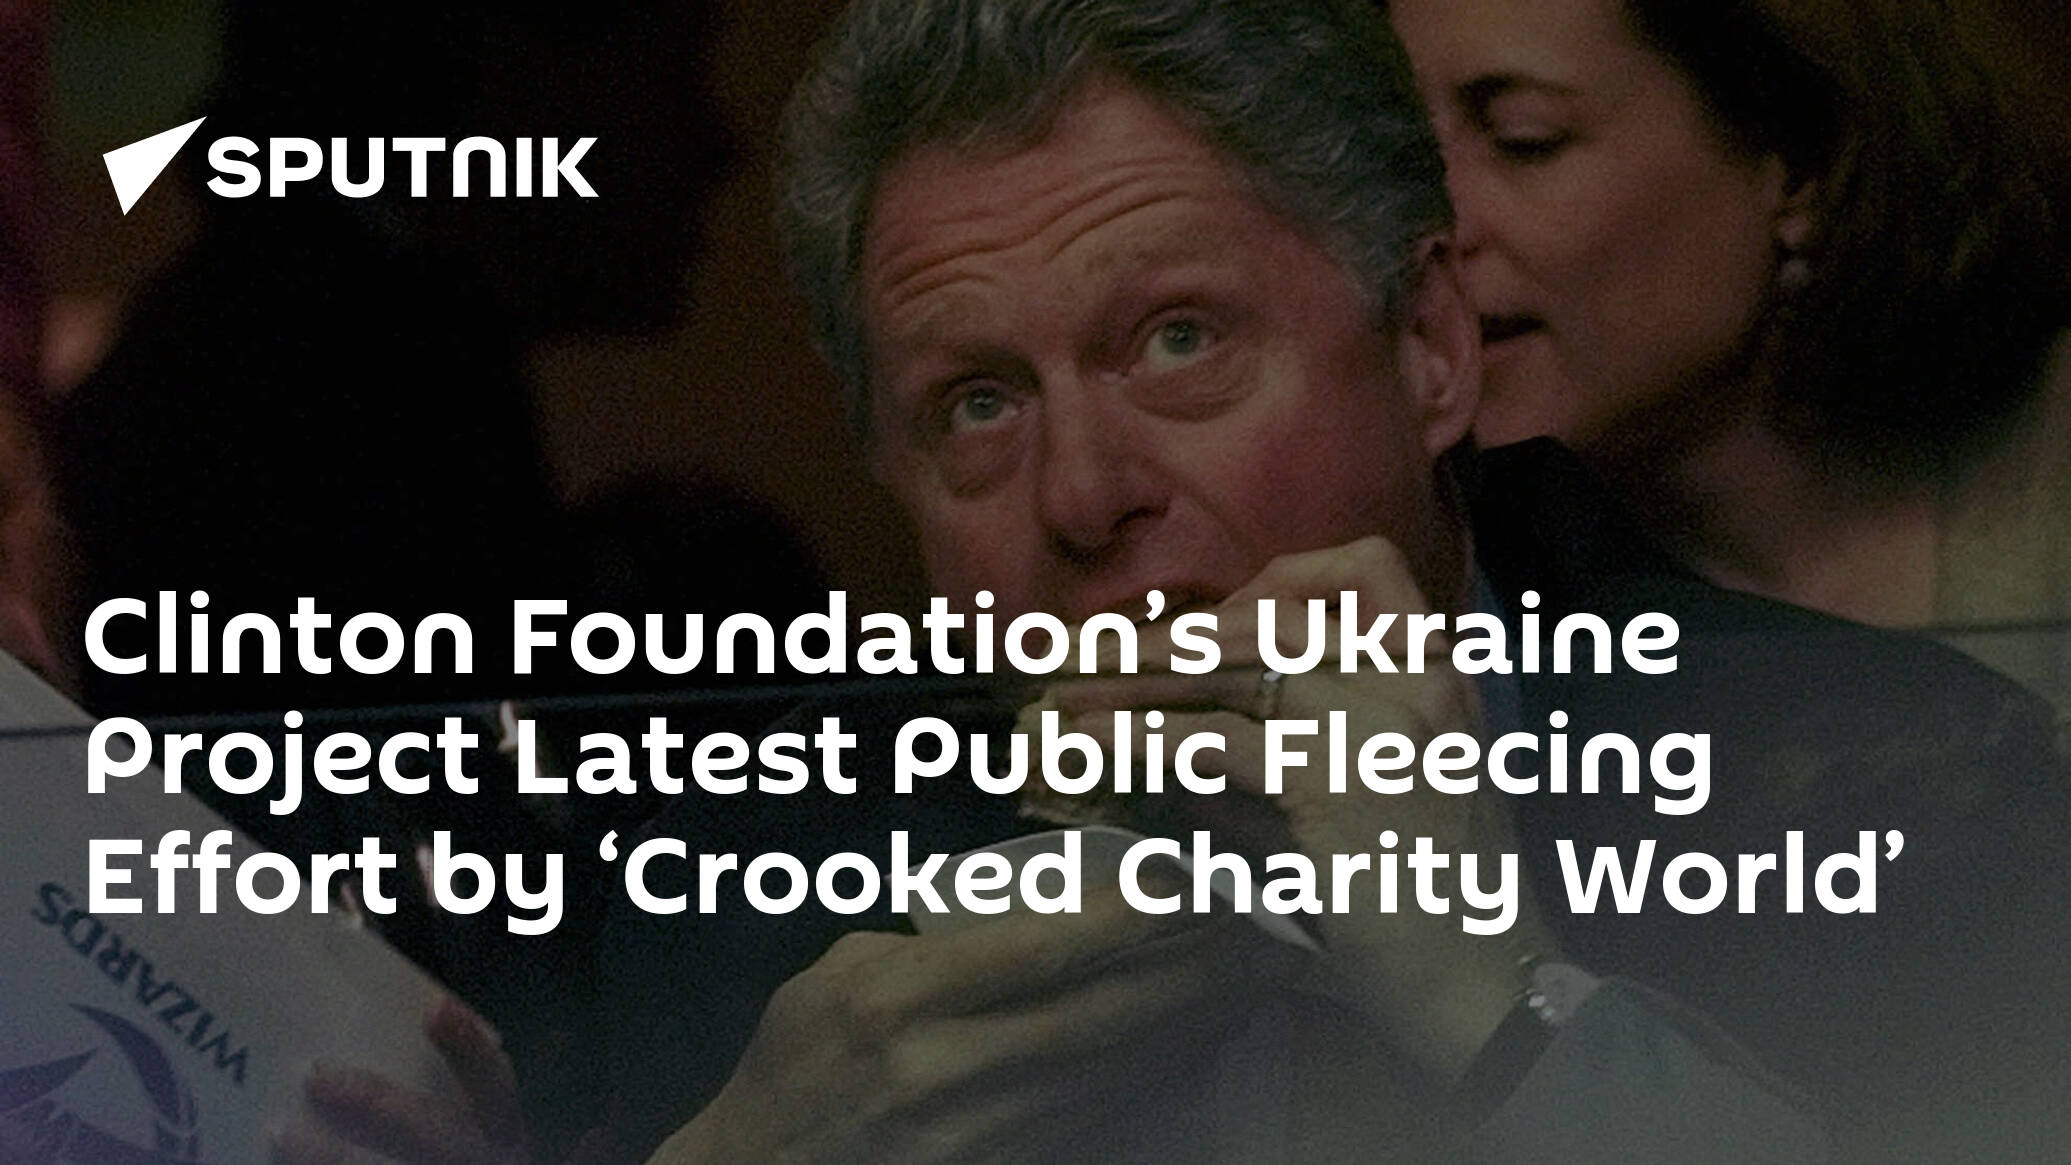 Clinton Foundation’s Ukraine Project Latest Public Fleecing Effort by ‘Crooked Charity World’